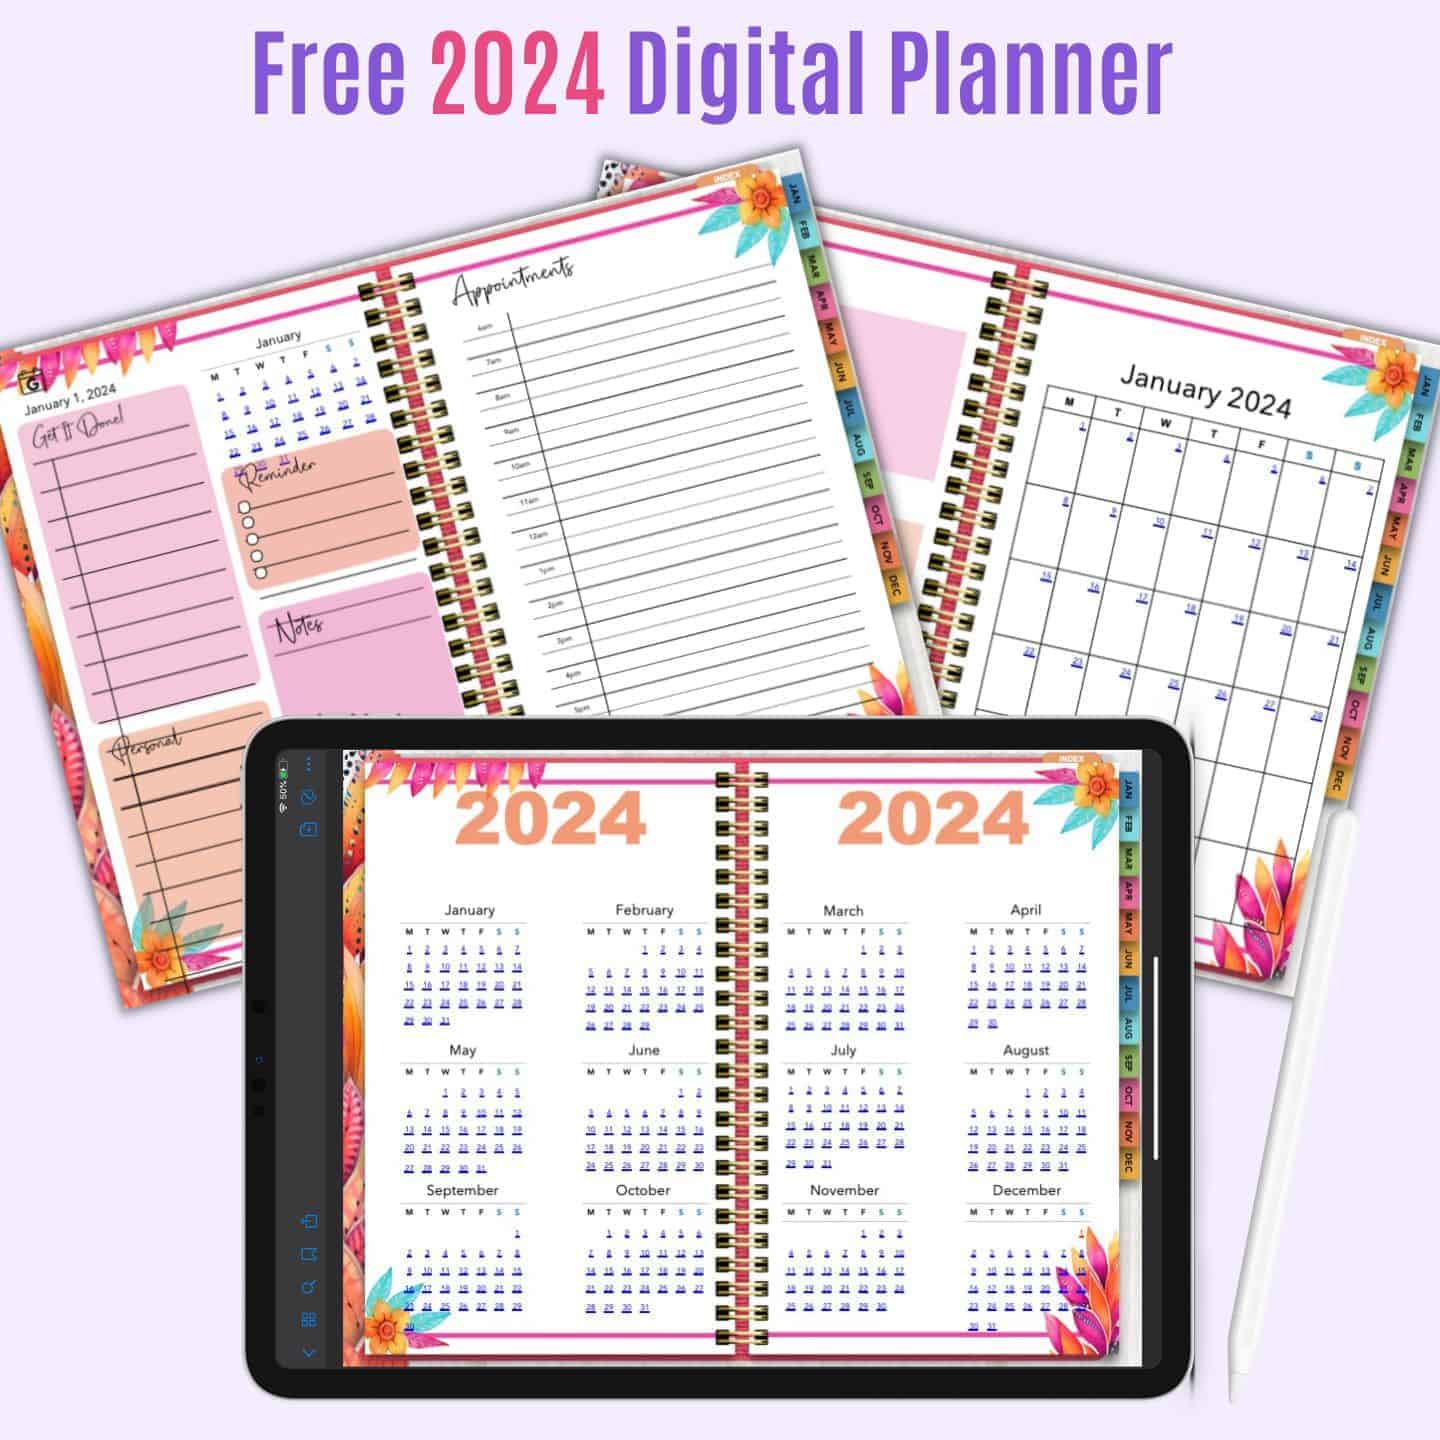 French Planner 2024, Hyperlinked Digital Planner for Goodnotes and PDF  Readers, Digital Agenda Planner in French Dated for 2024 